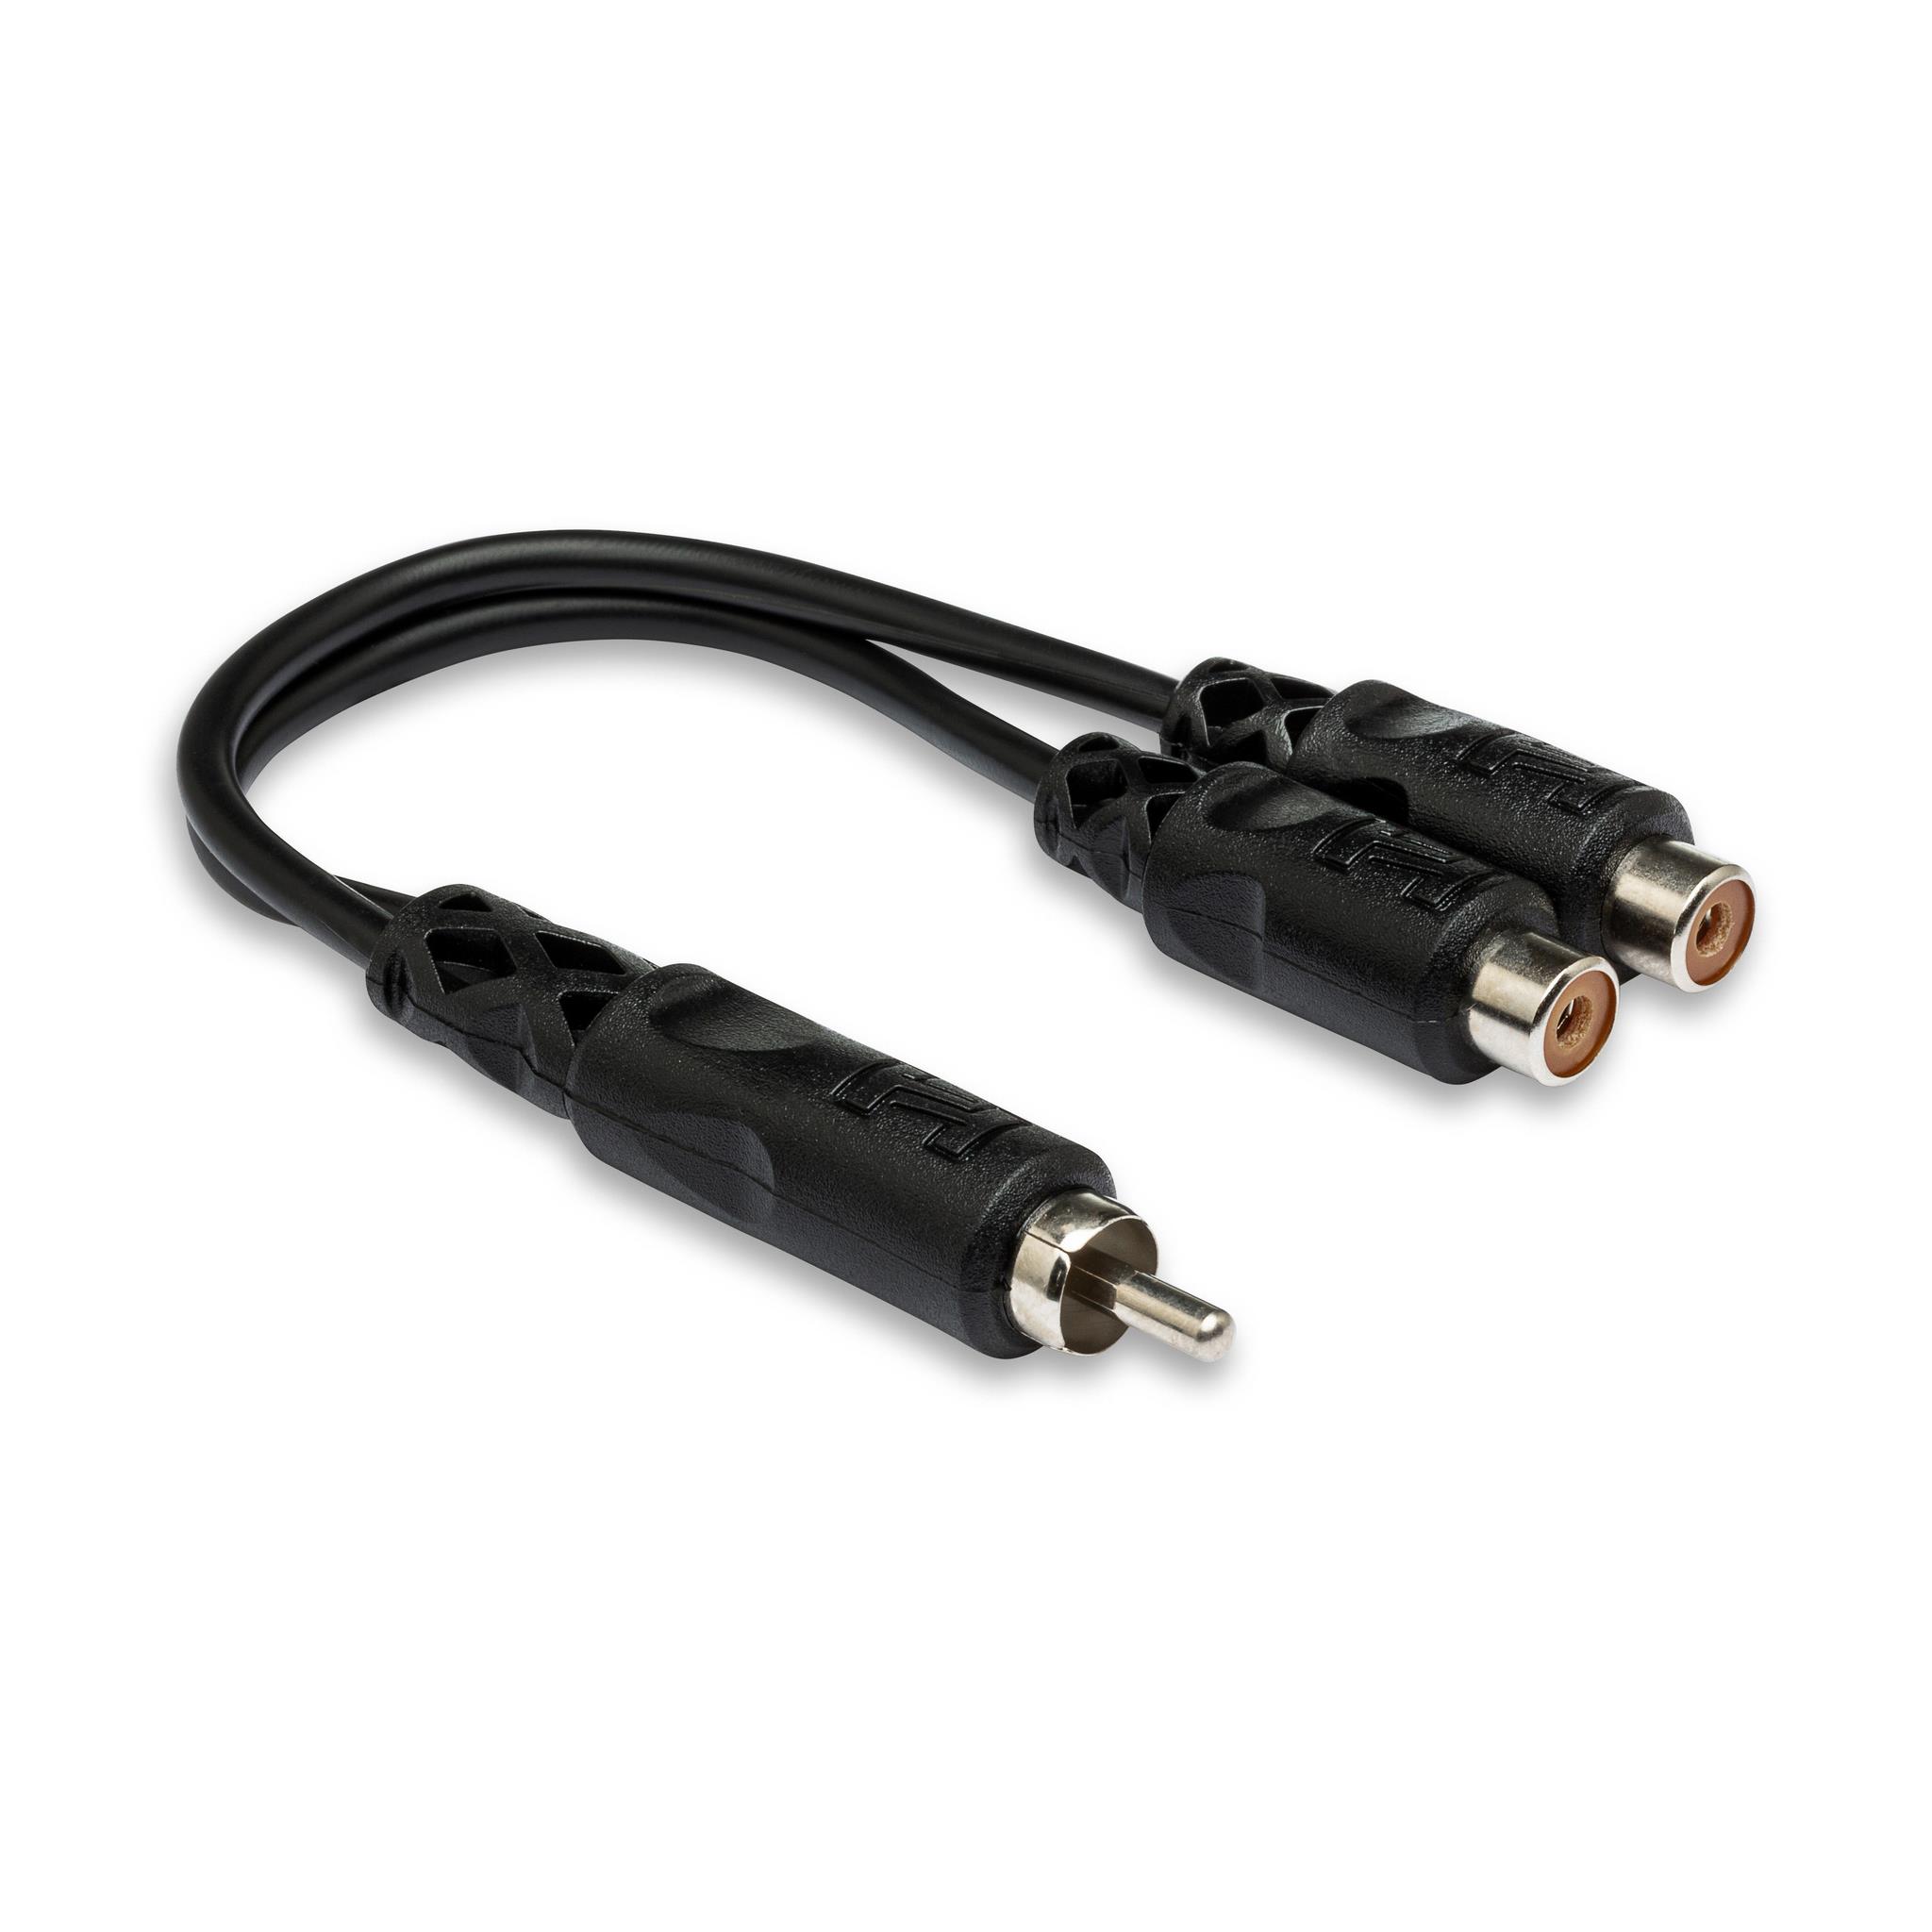 Hosa RCA male to dual RCA female Y Cable